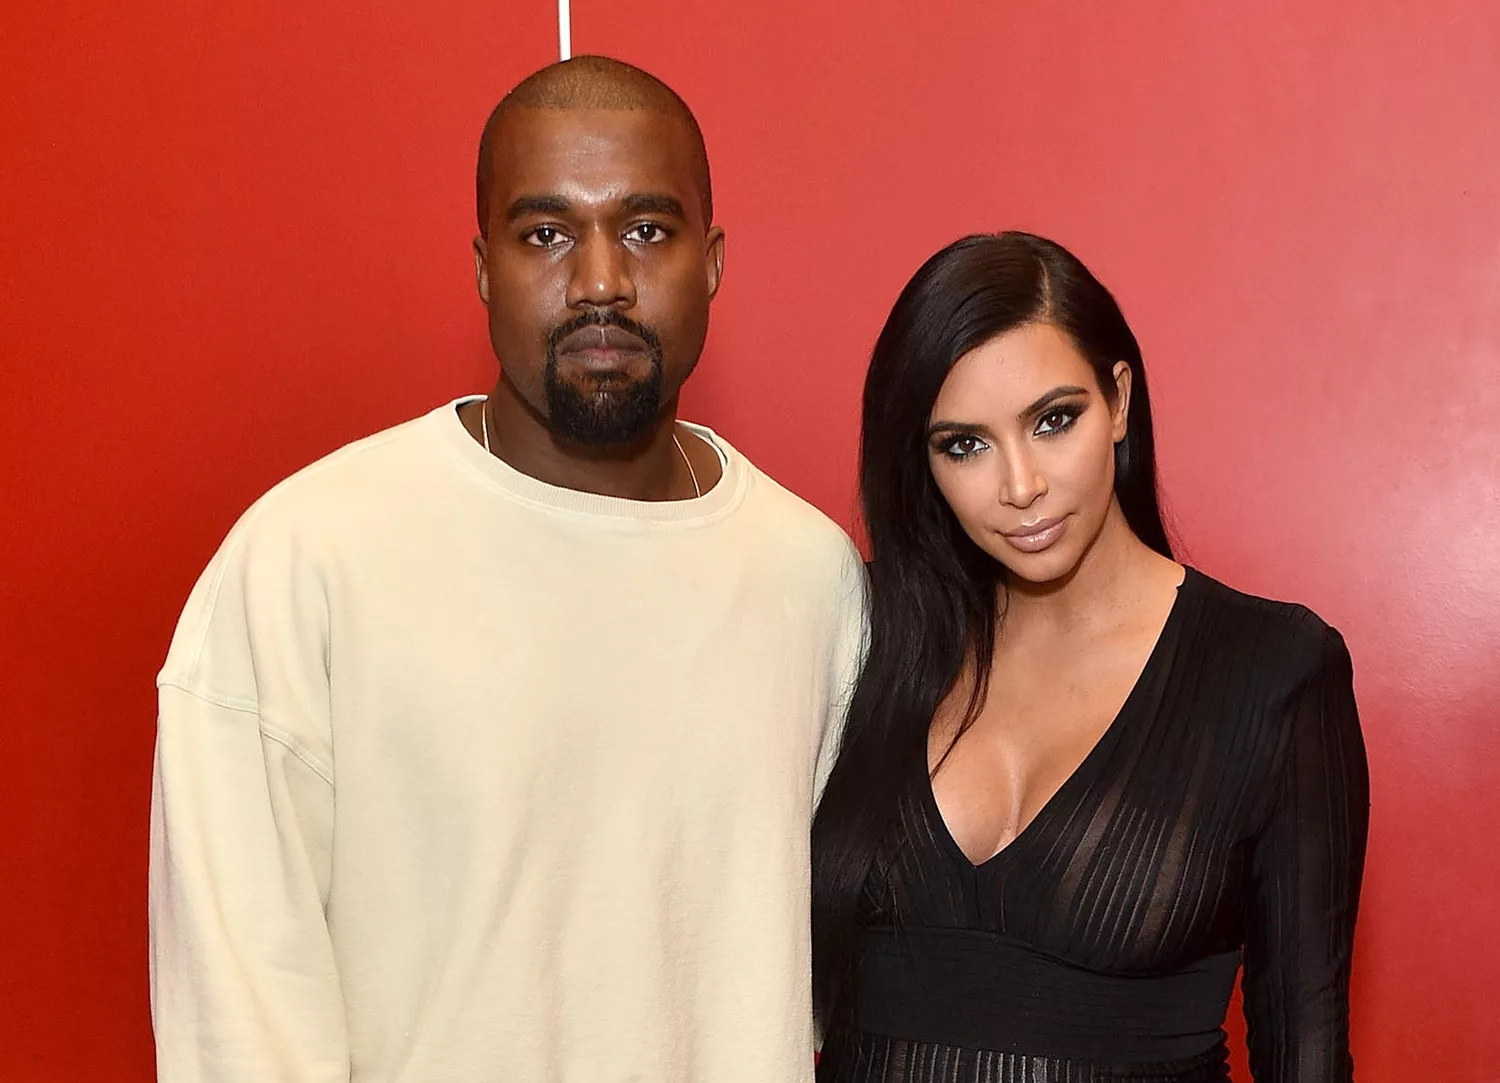 Kim Kardashian Breaks Down Saying Shed Do “anything” To Get The Old Kanye West Back 